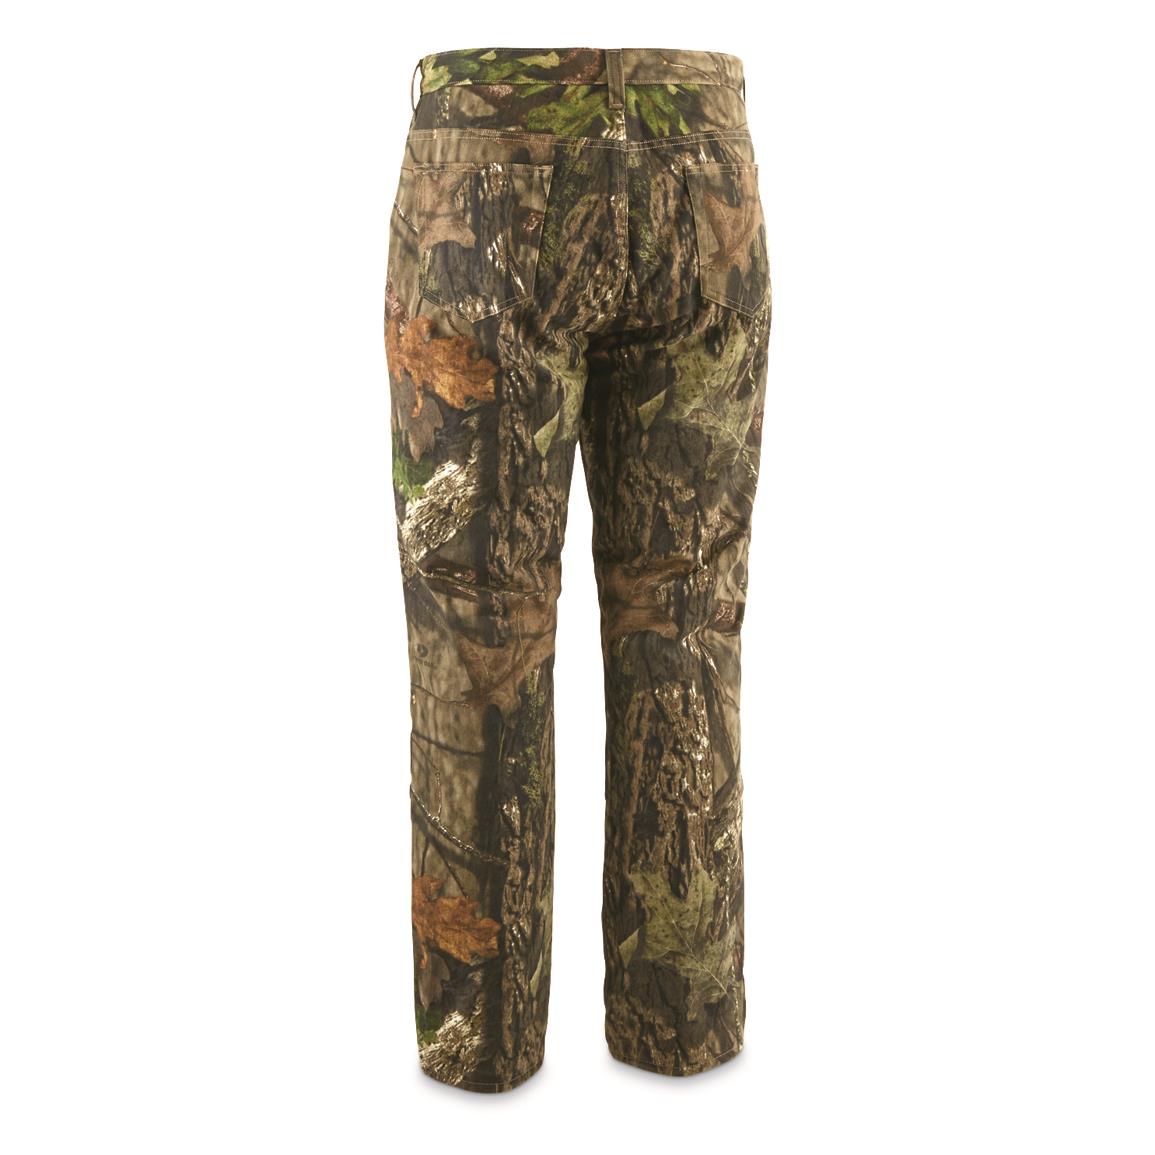 Guide Gear Men's Camo Insulated Jeans - 709225, Camo Pants at Sportsman ...